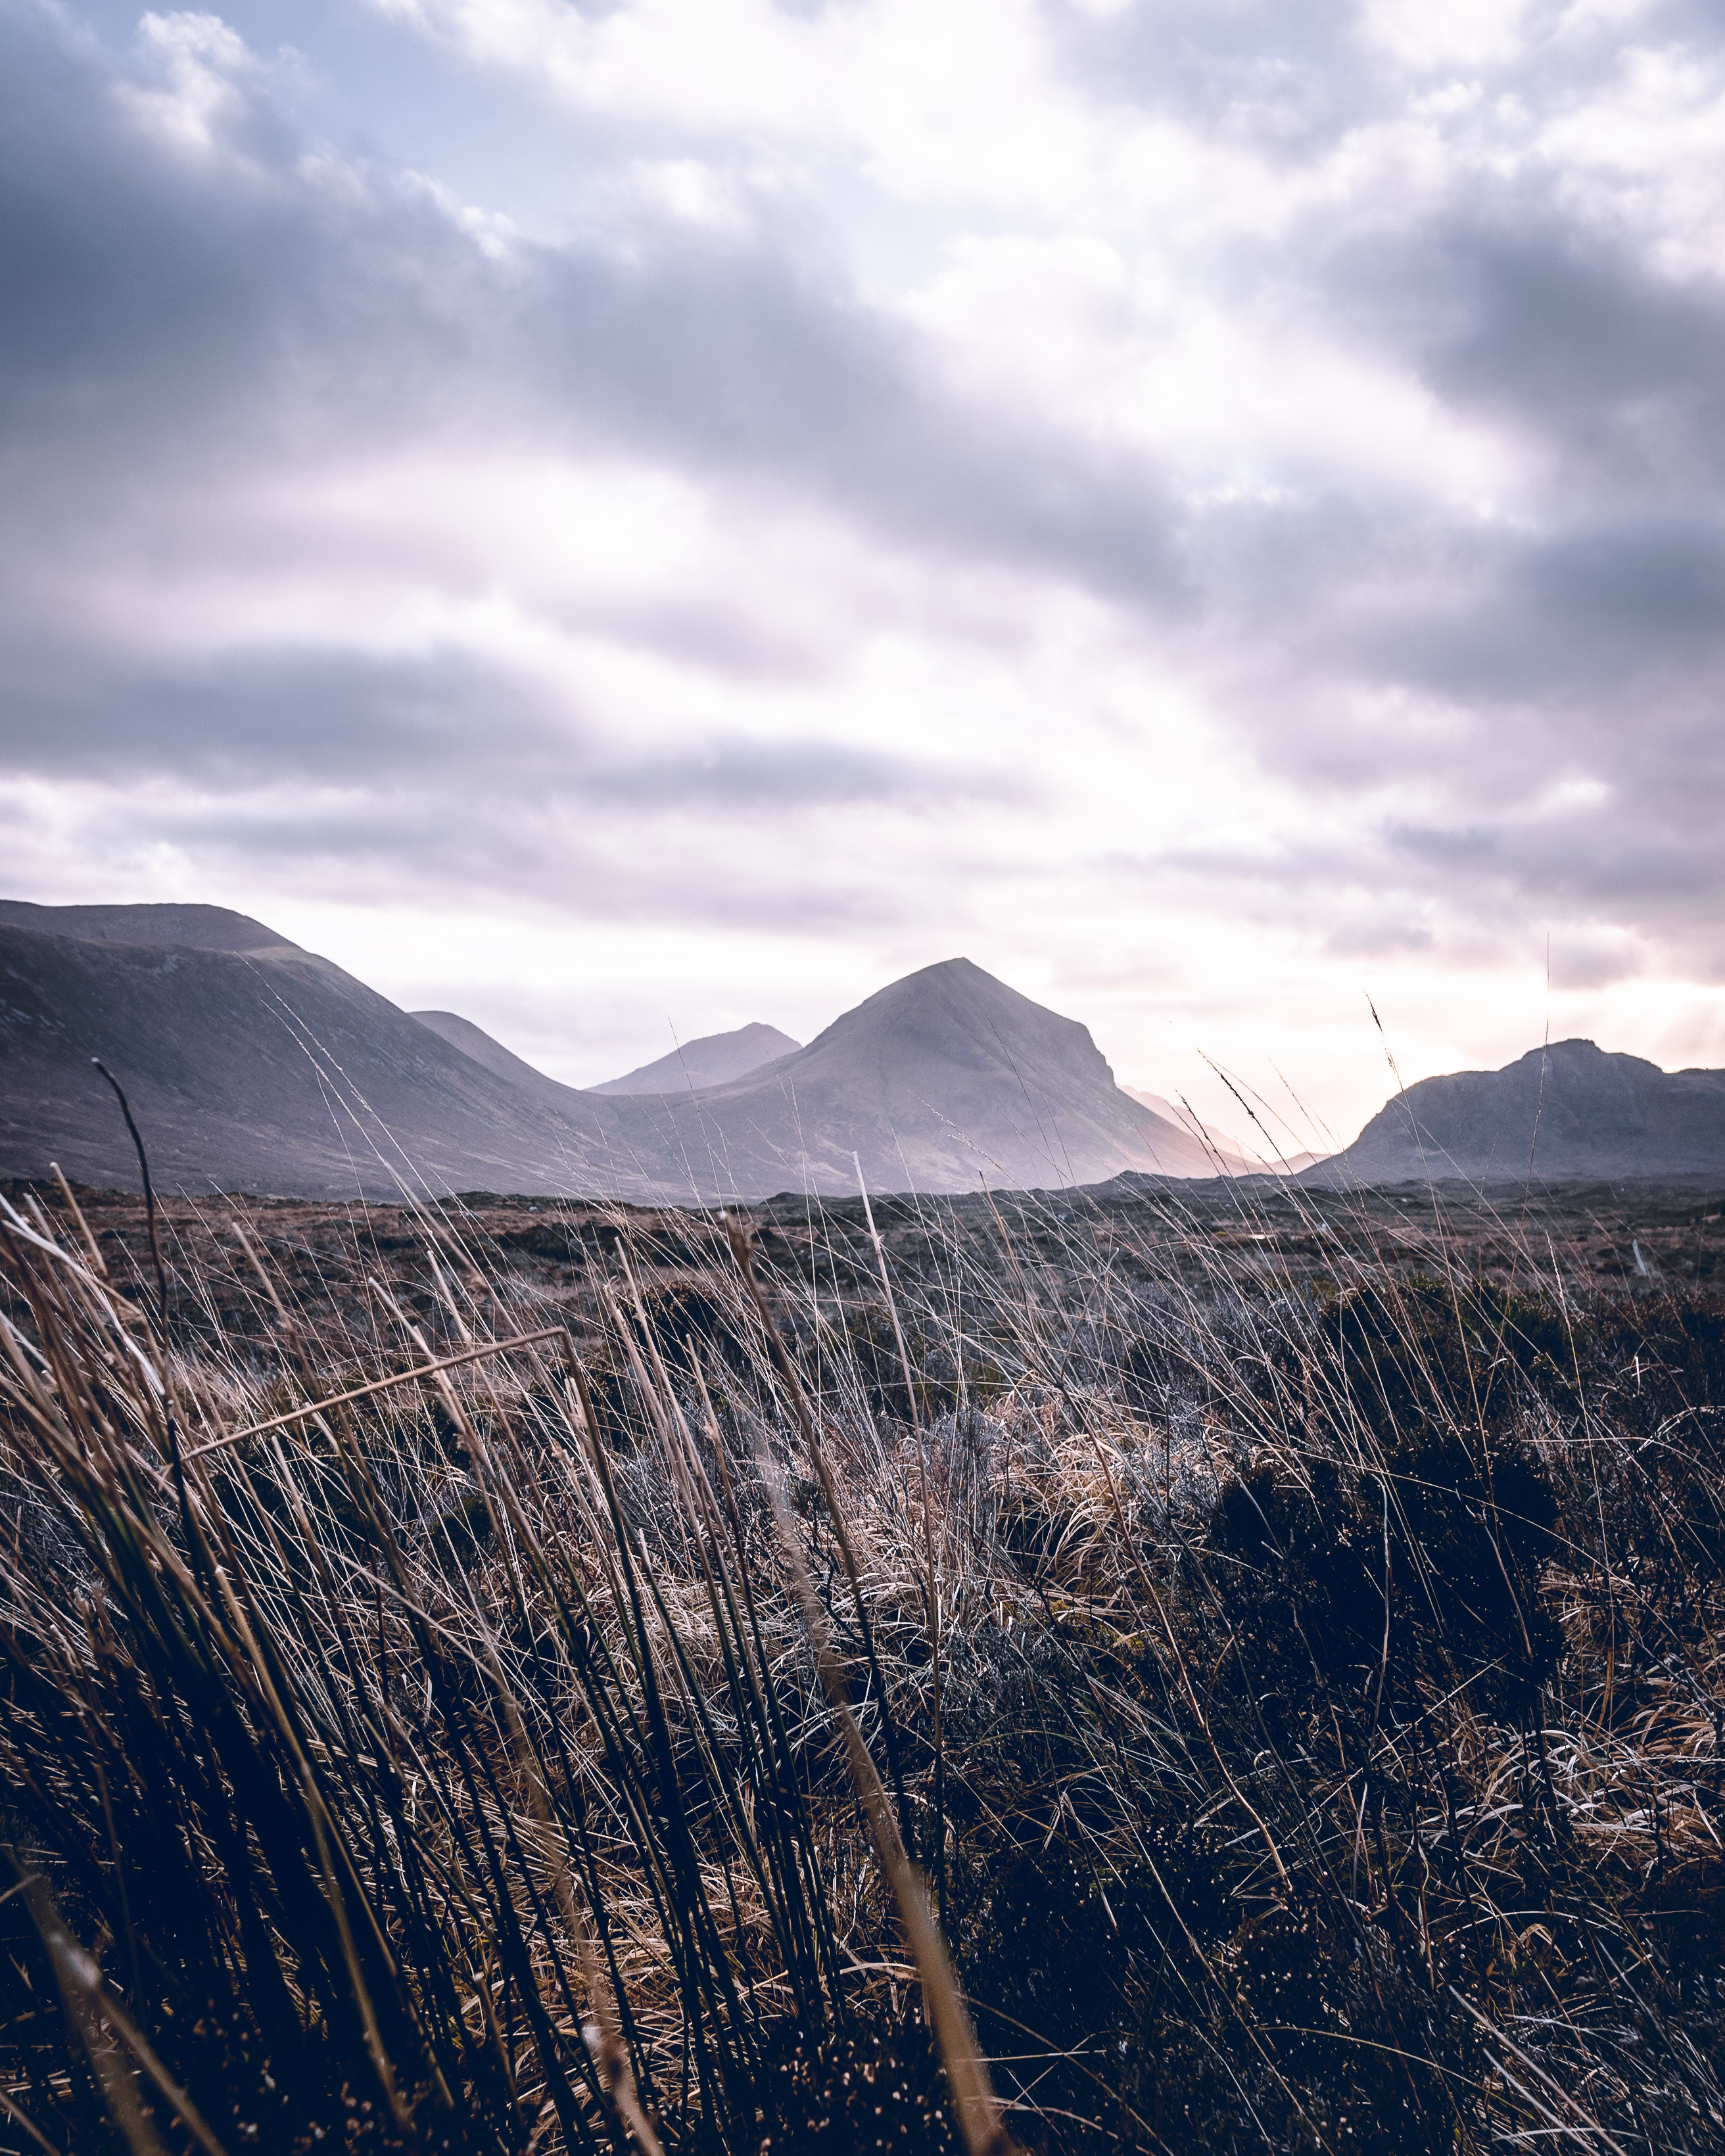 mountains, clouds, landscape, nature, grass, fog, hilly High Definition image